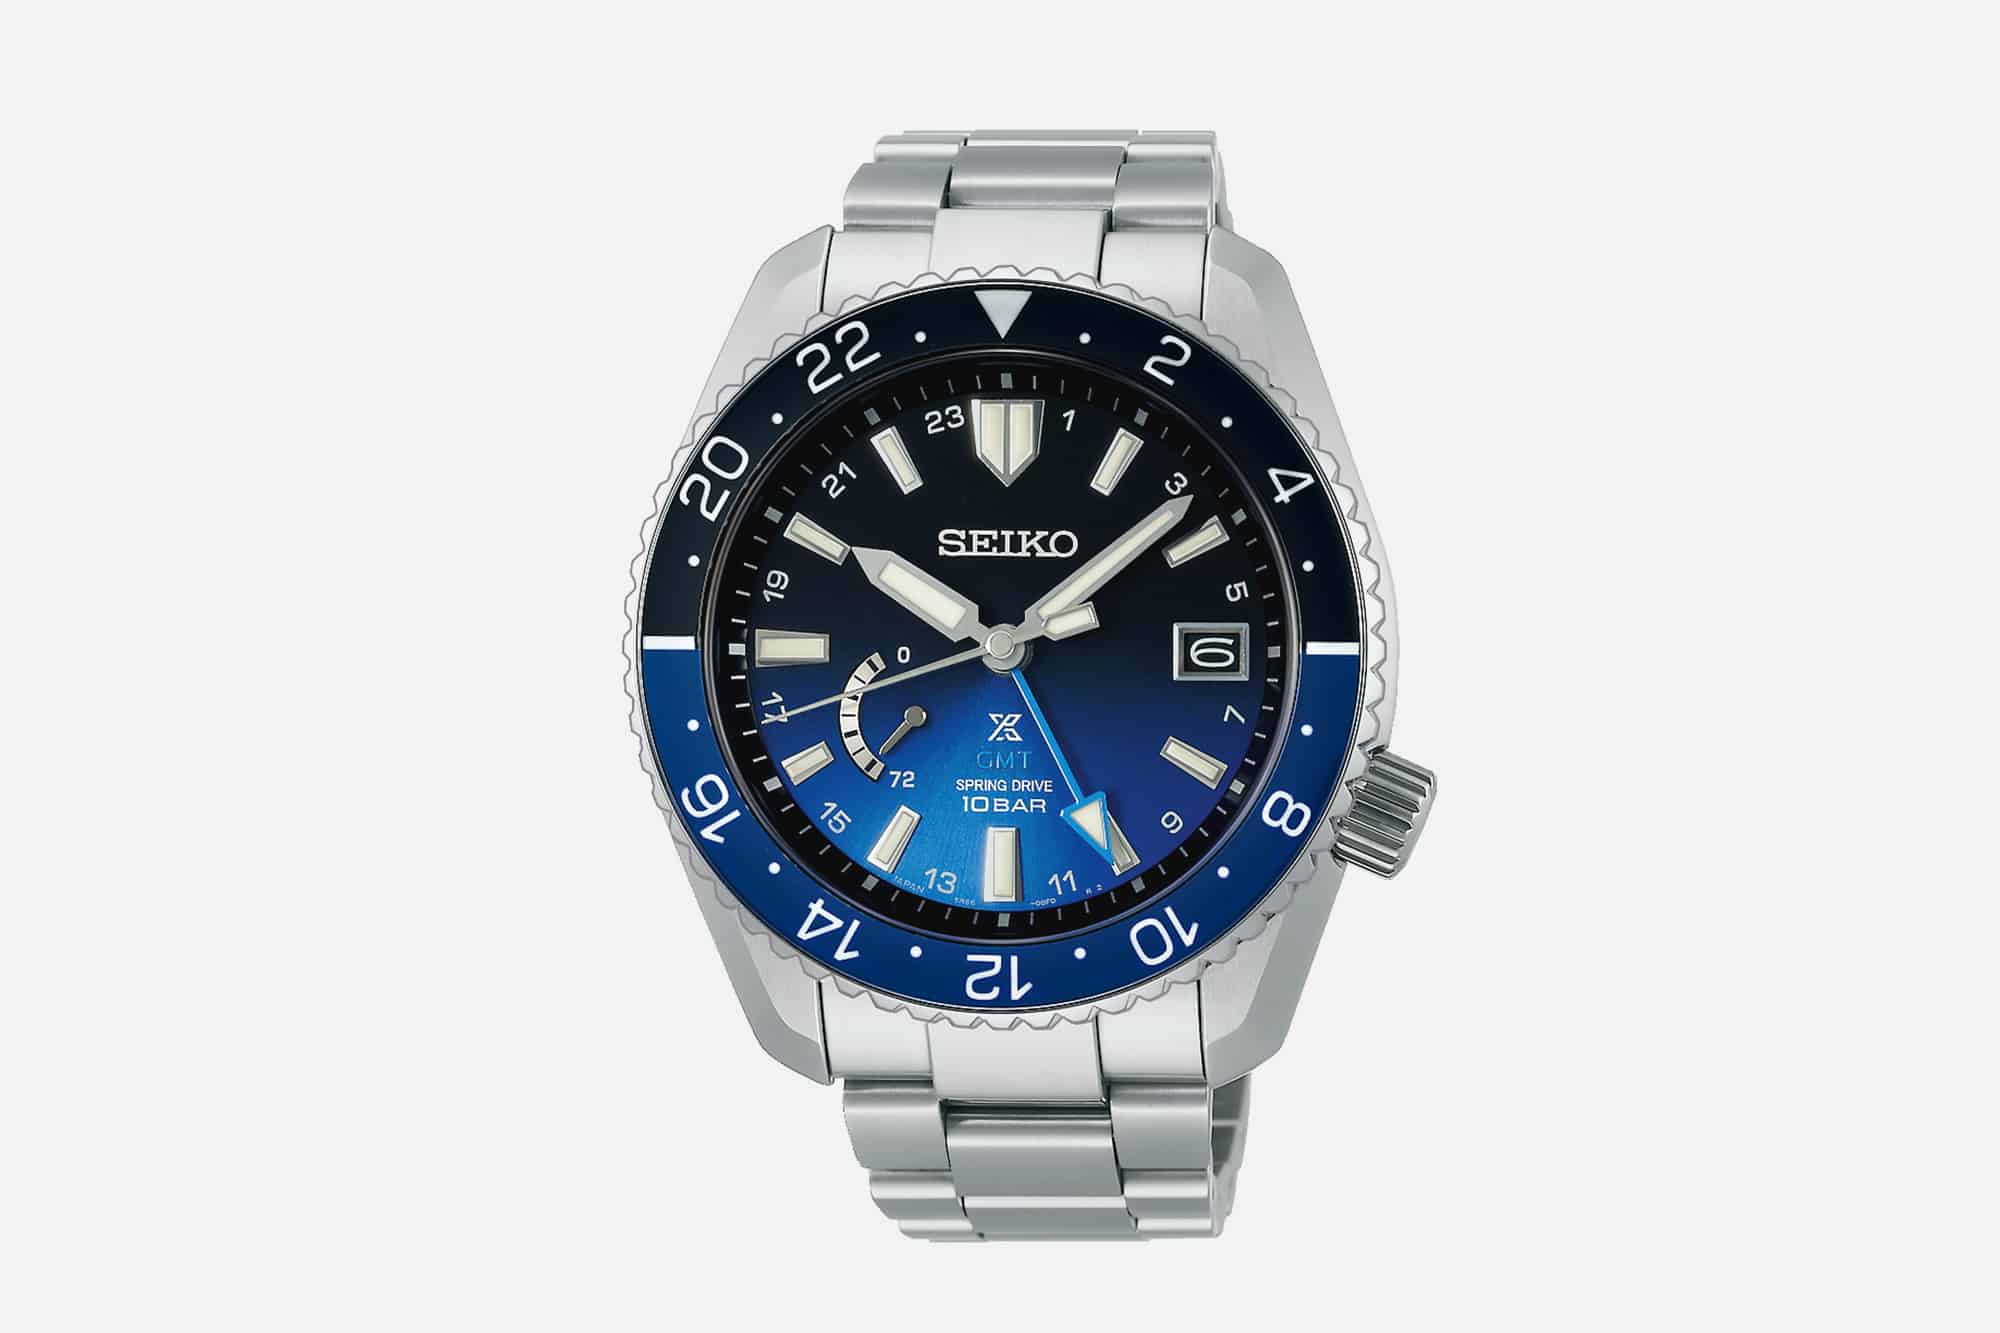 Seiko Introduces the SNR049, their Latest Prospex LX Limited Edition